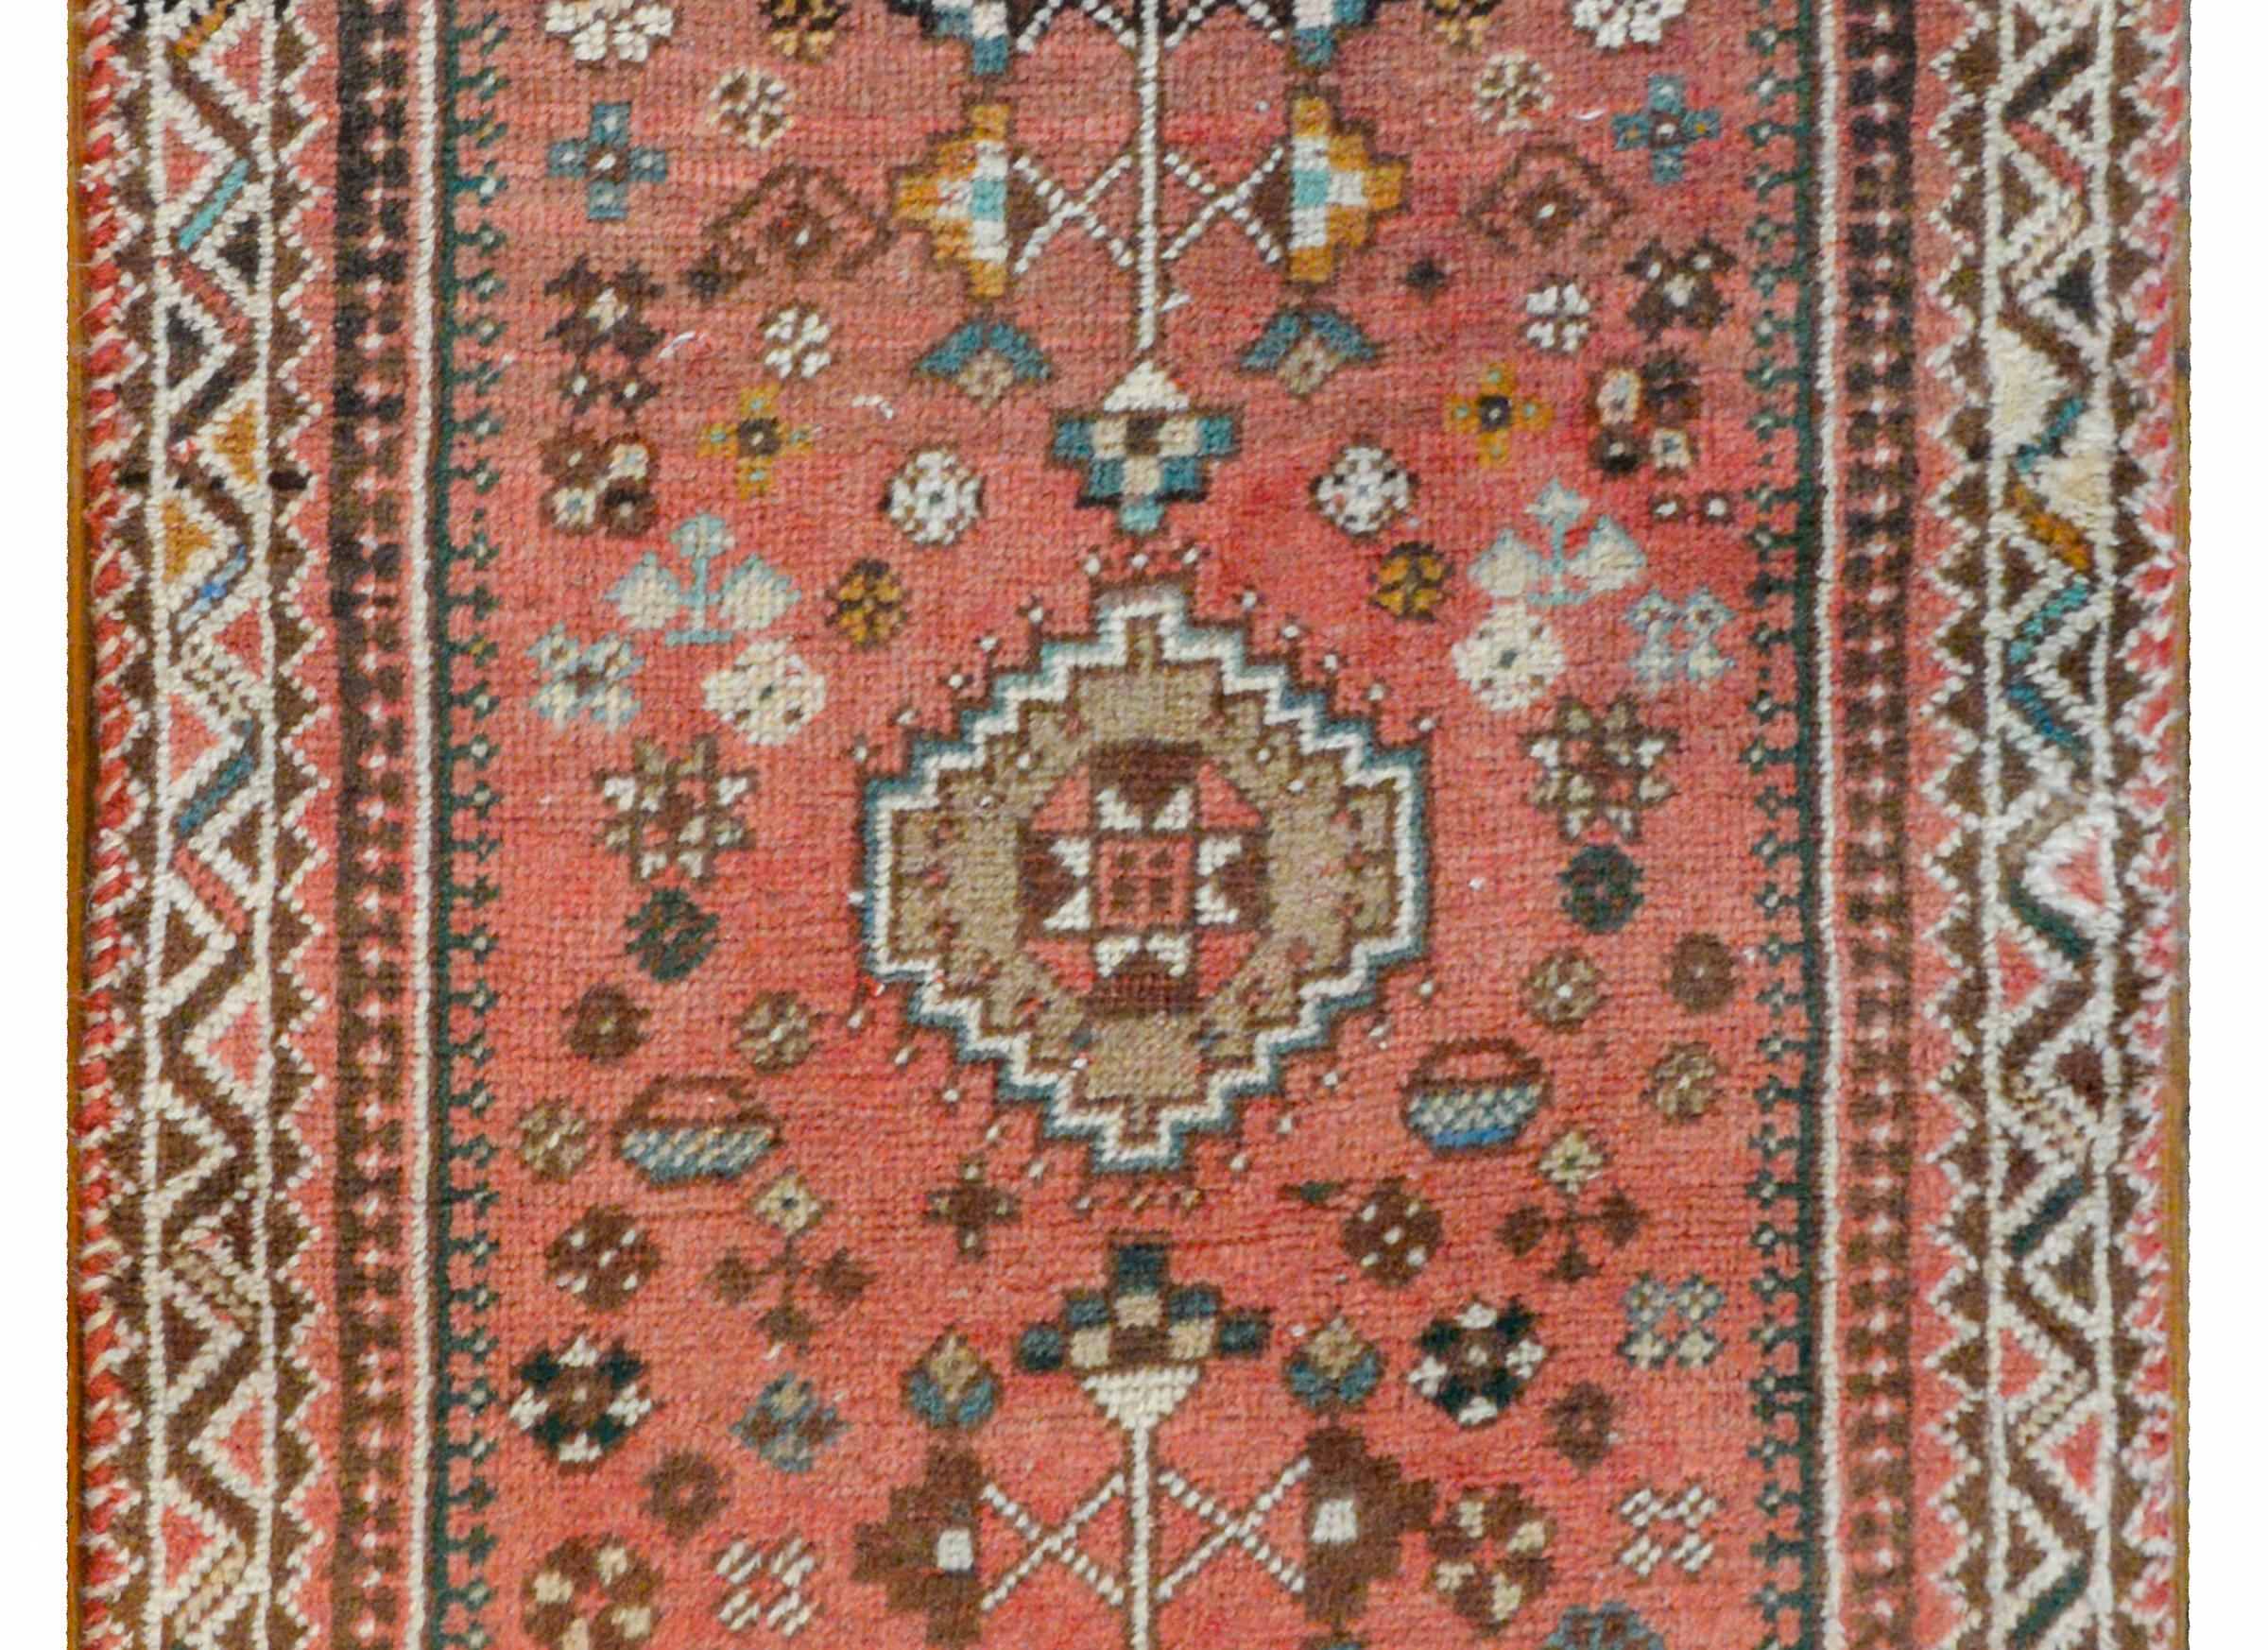 A fantastic early 20th century Persian Shiraz runner with a bold tribally woven pattern containing a marlge stepped diamond medallion amidst a field of stylized geometric flowers all woven in indigo, cream, yellow, brown, and indigo colored